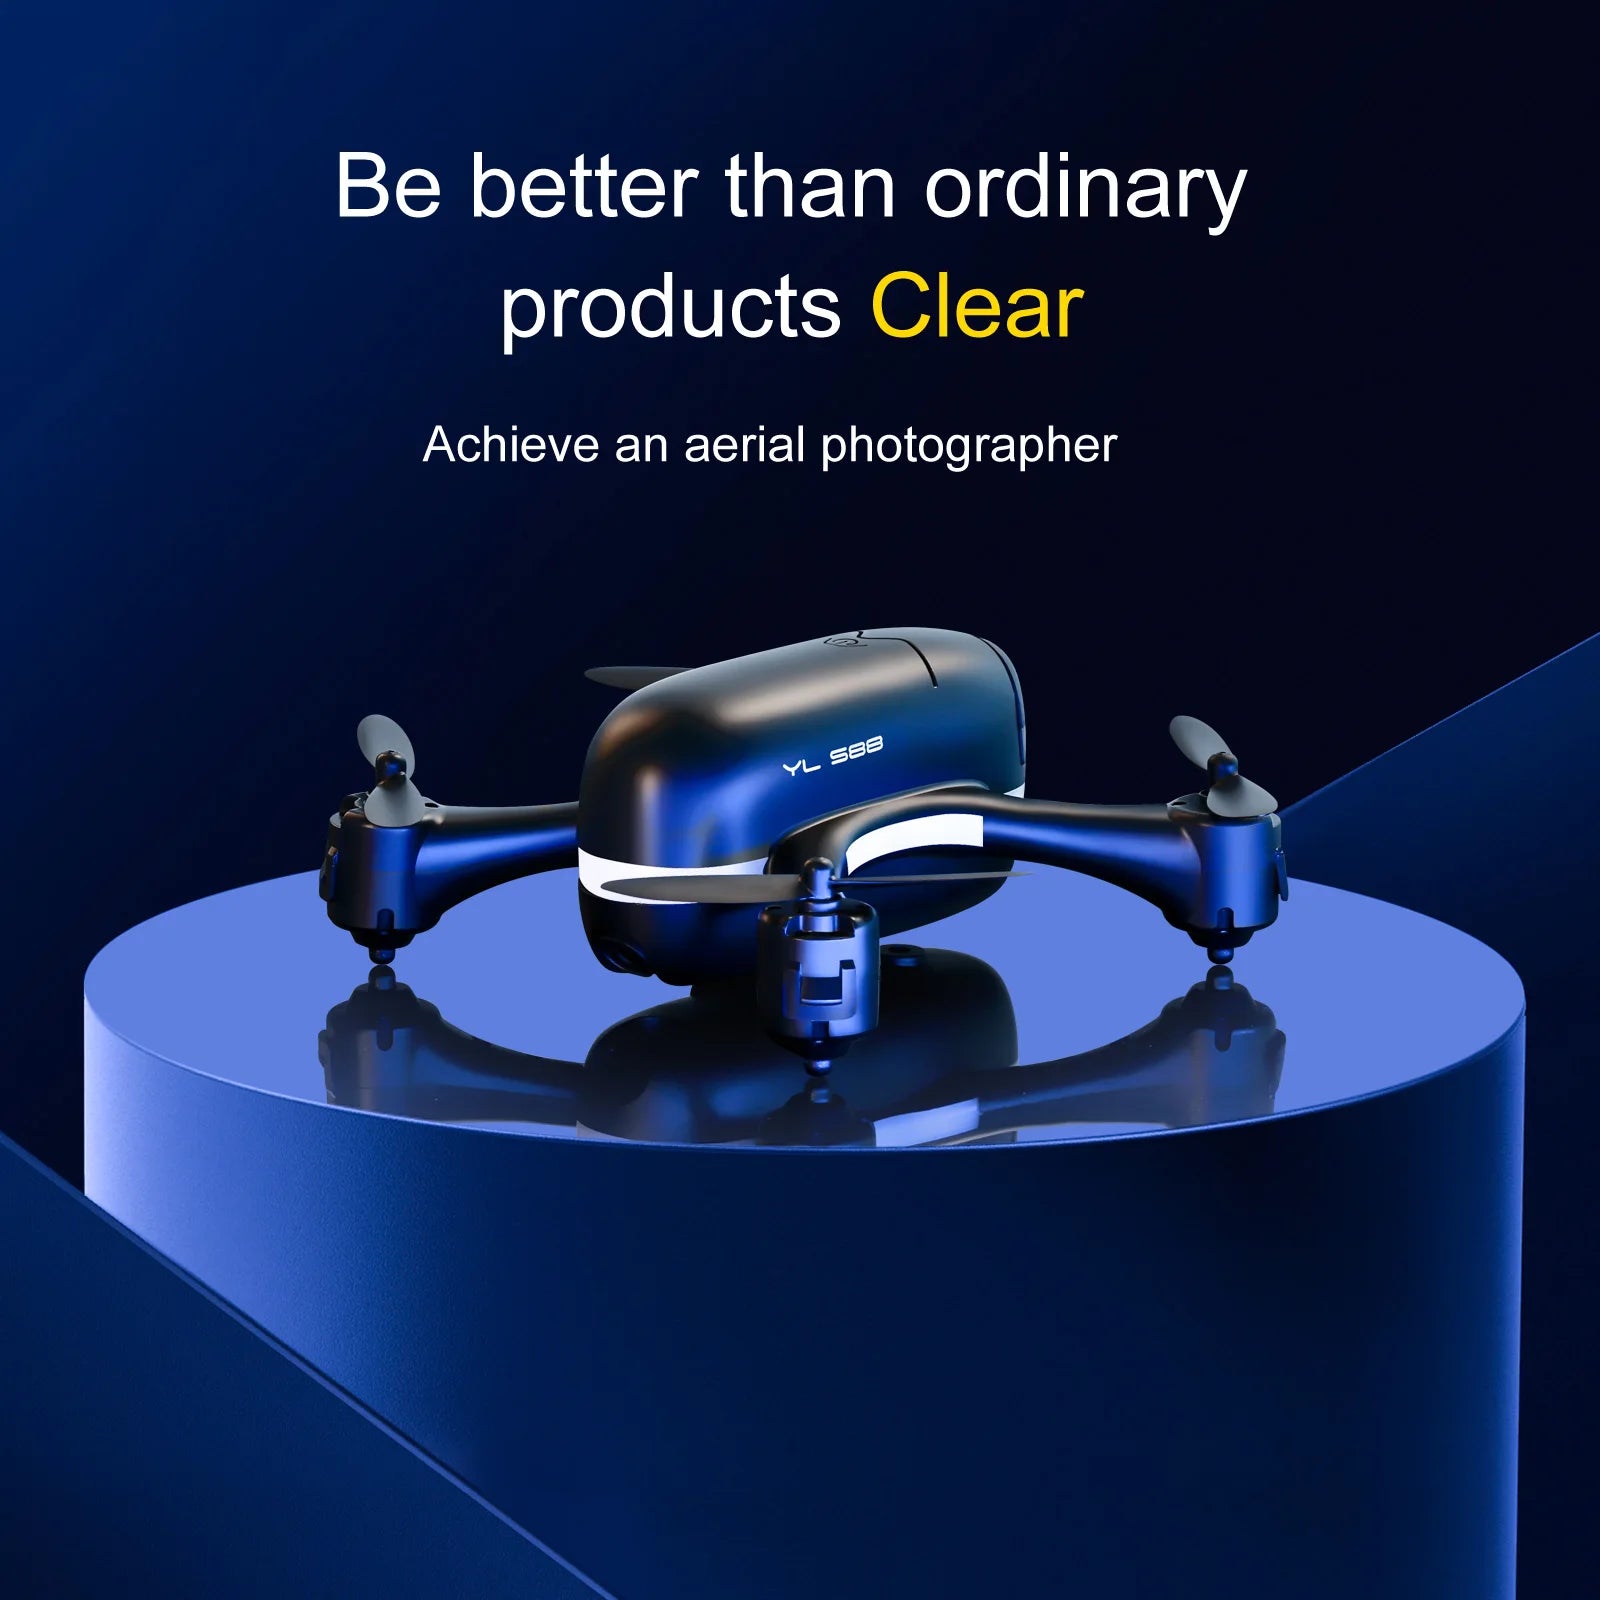 S88 Drone, be better than ordinary products clear achieve an aerial photographer yl 